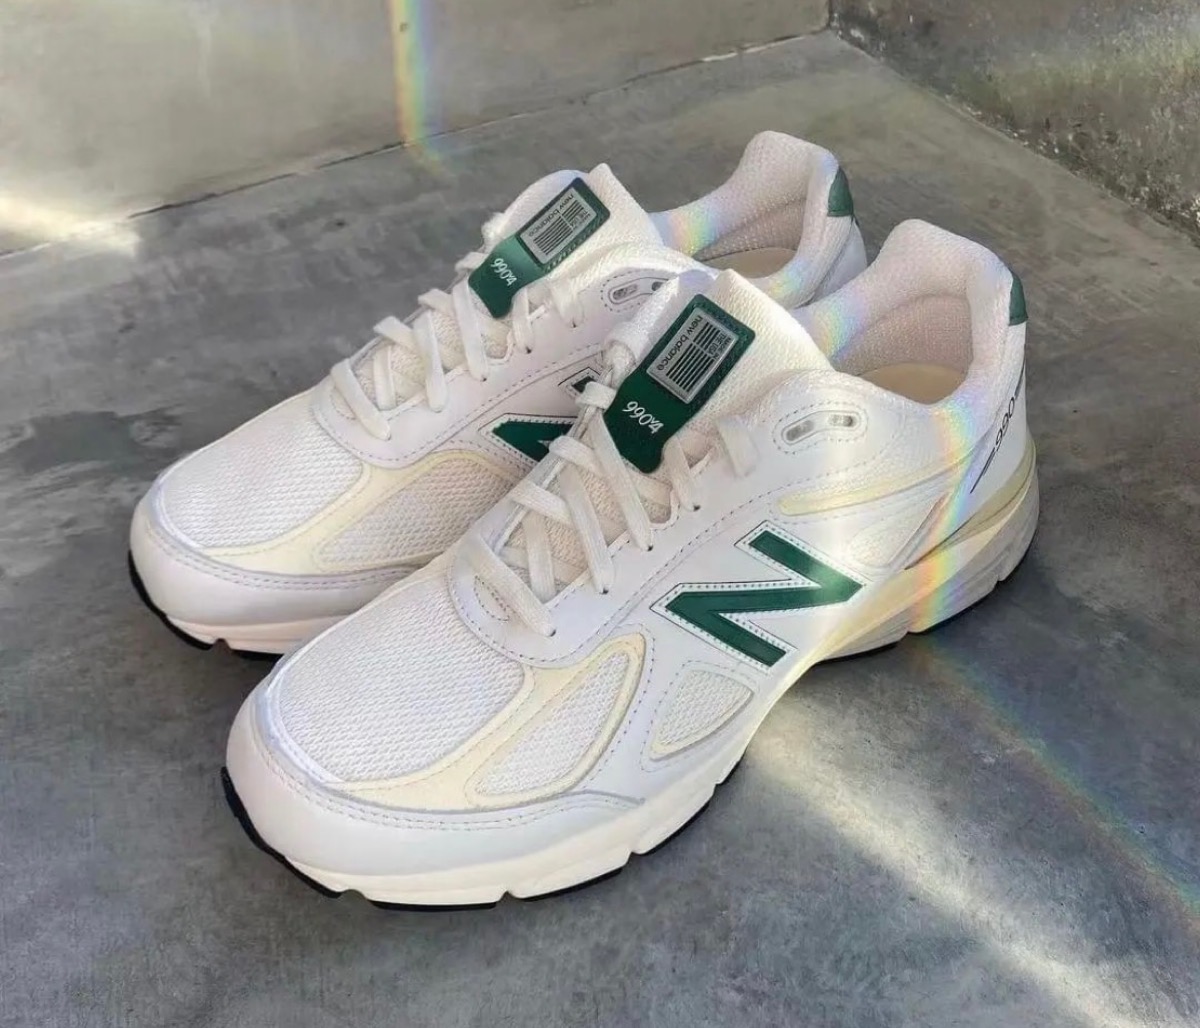 New Balance〈990v4 “Calcium/Forest Green”〉が国内9月7日より発売 ...